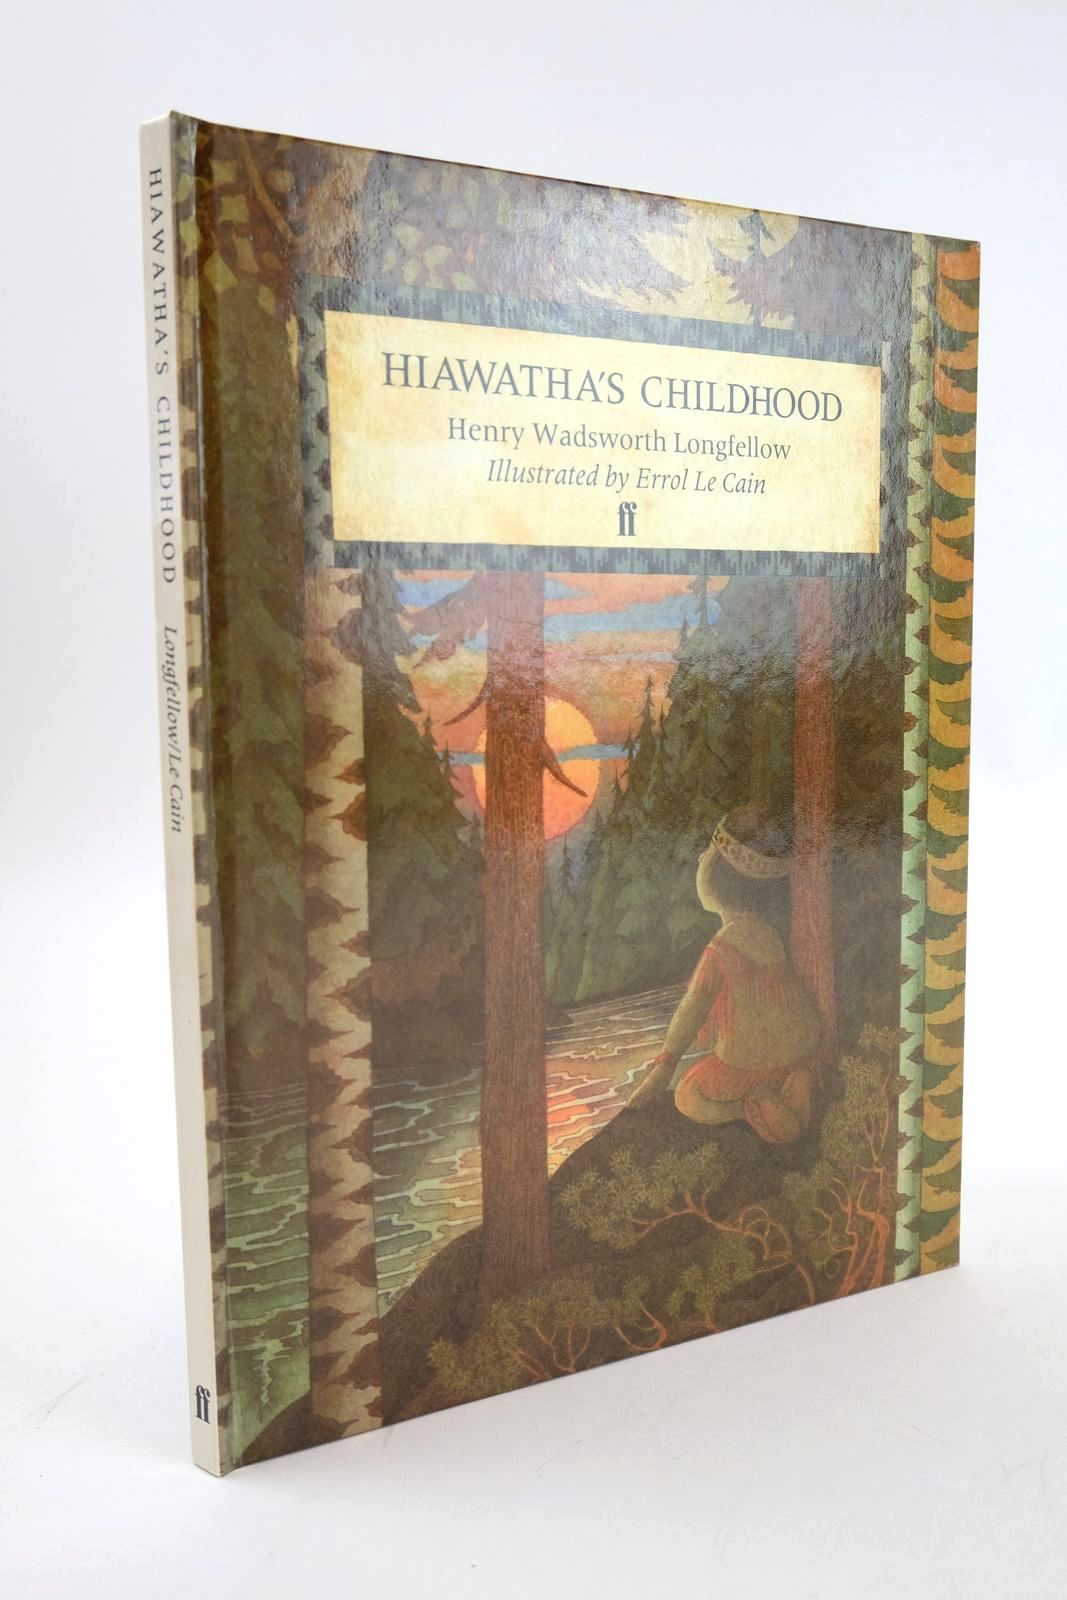 Photo of HIAWATHA'S CHILDHOOD written by Longfellow, Henry Wadsworth illustrated by Le Cain, Errol published by Faber &amp; Faber (STOCK CODE: 1325037)  for sale by Stella & Rose's Books